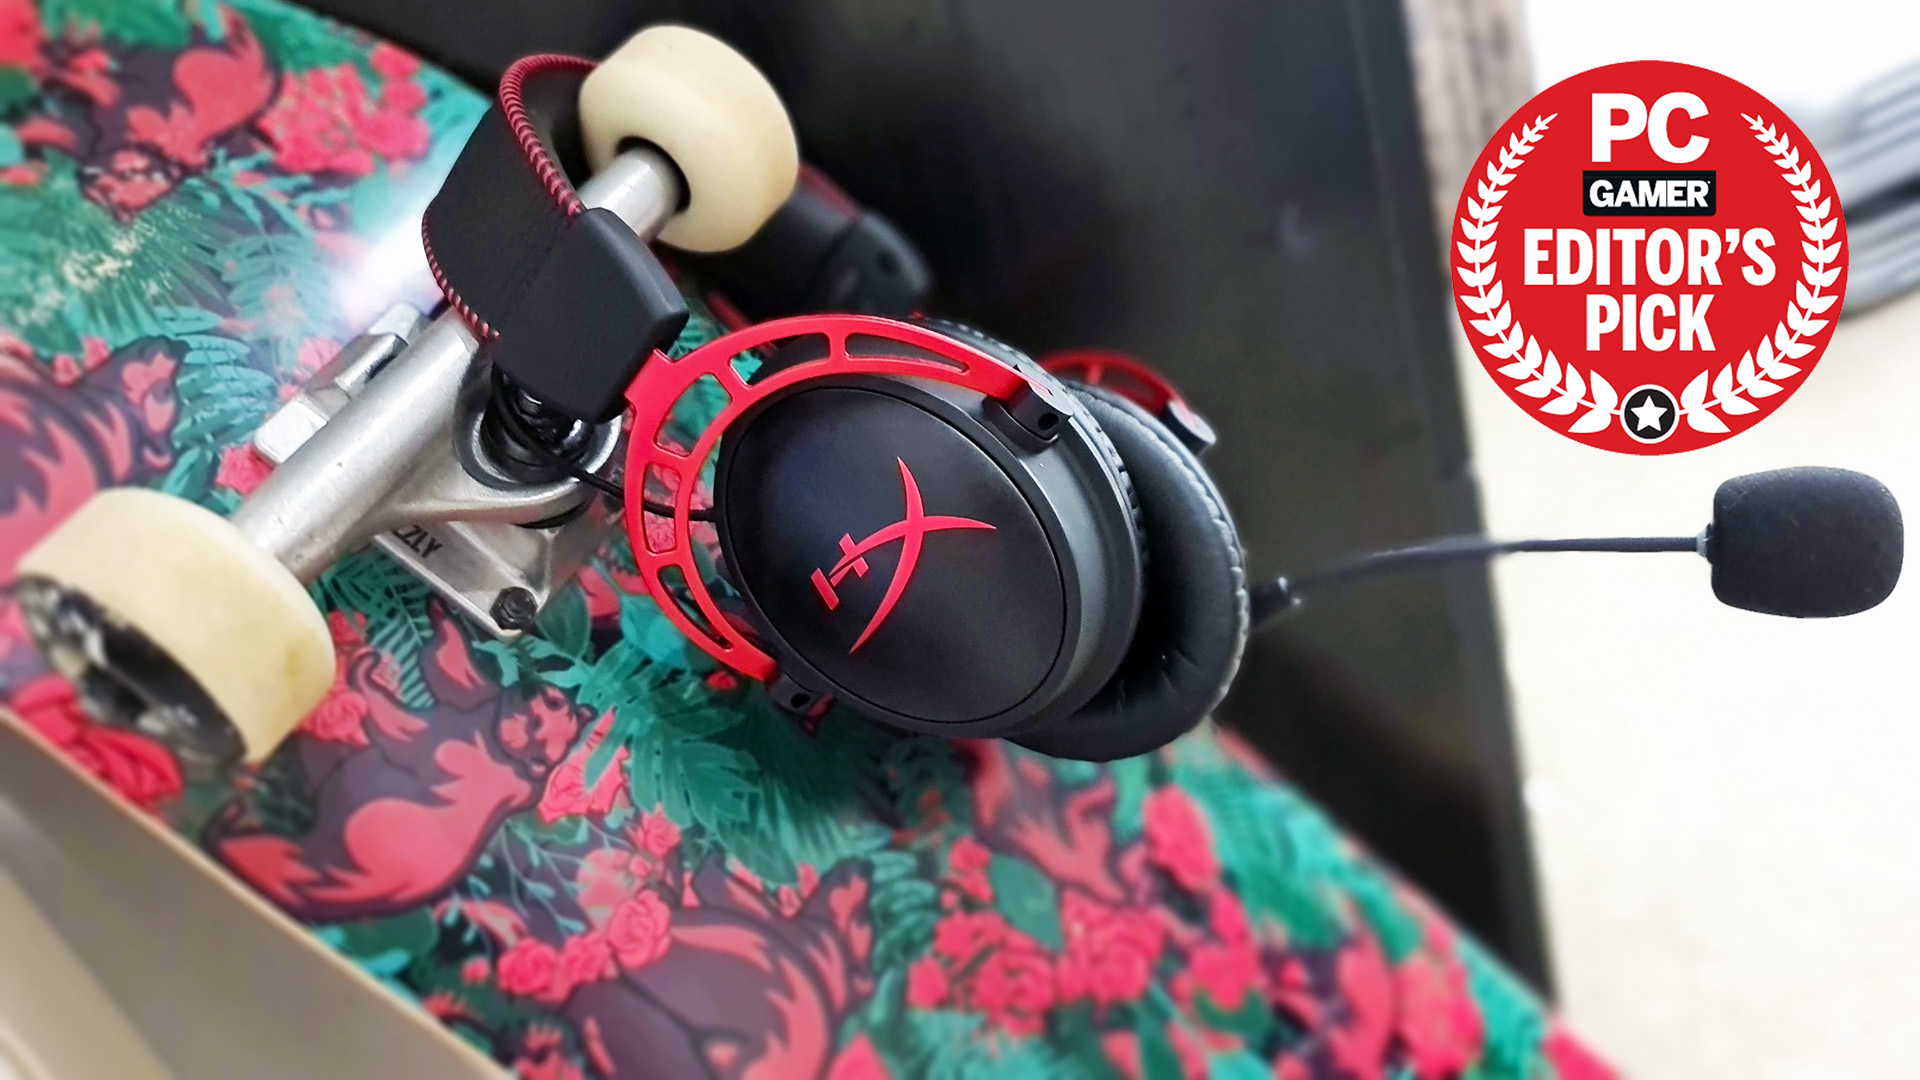 The HyperX Cloud Alpha Wireless headset in testing with PC Gamer Editor